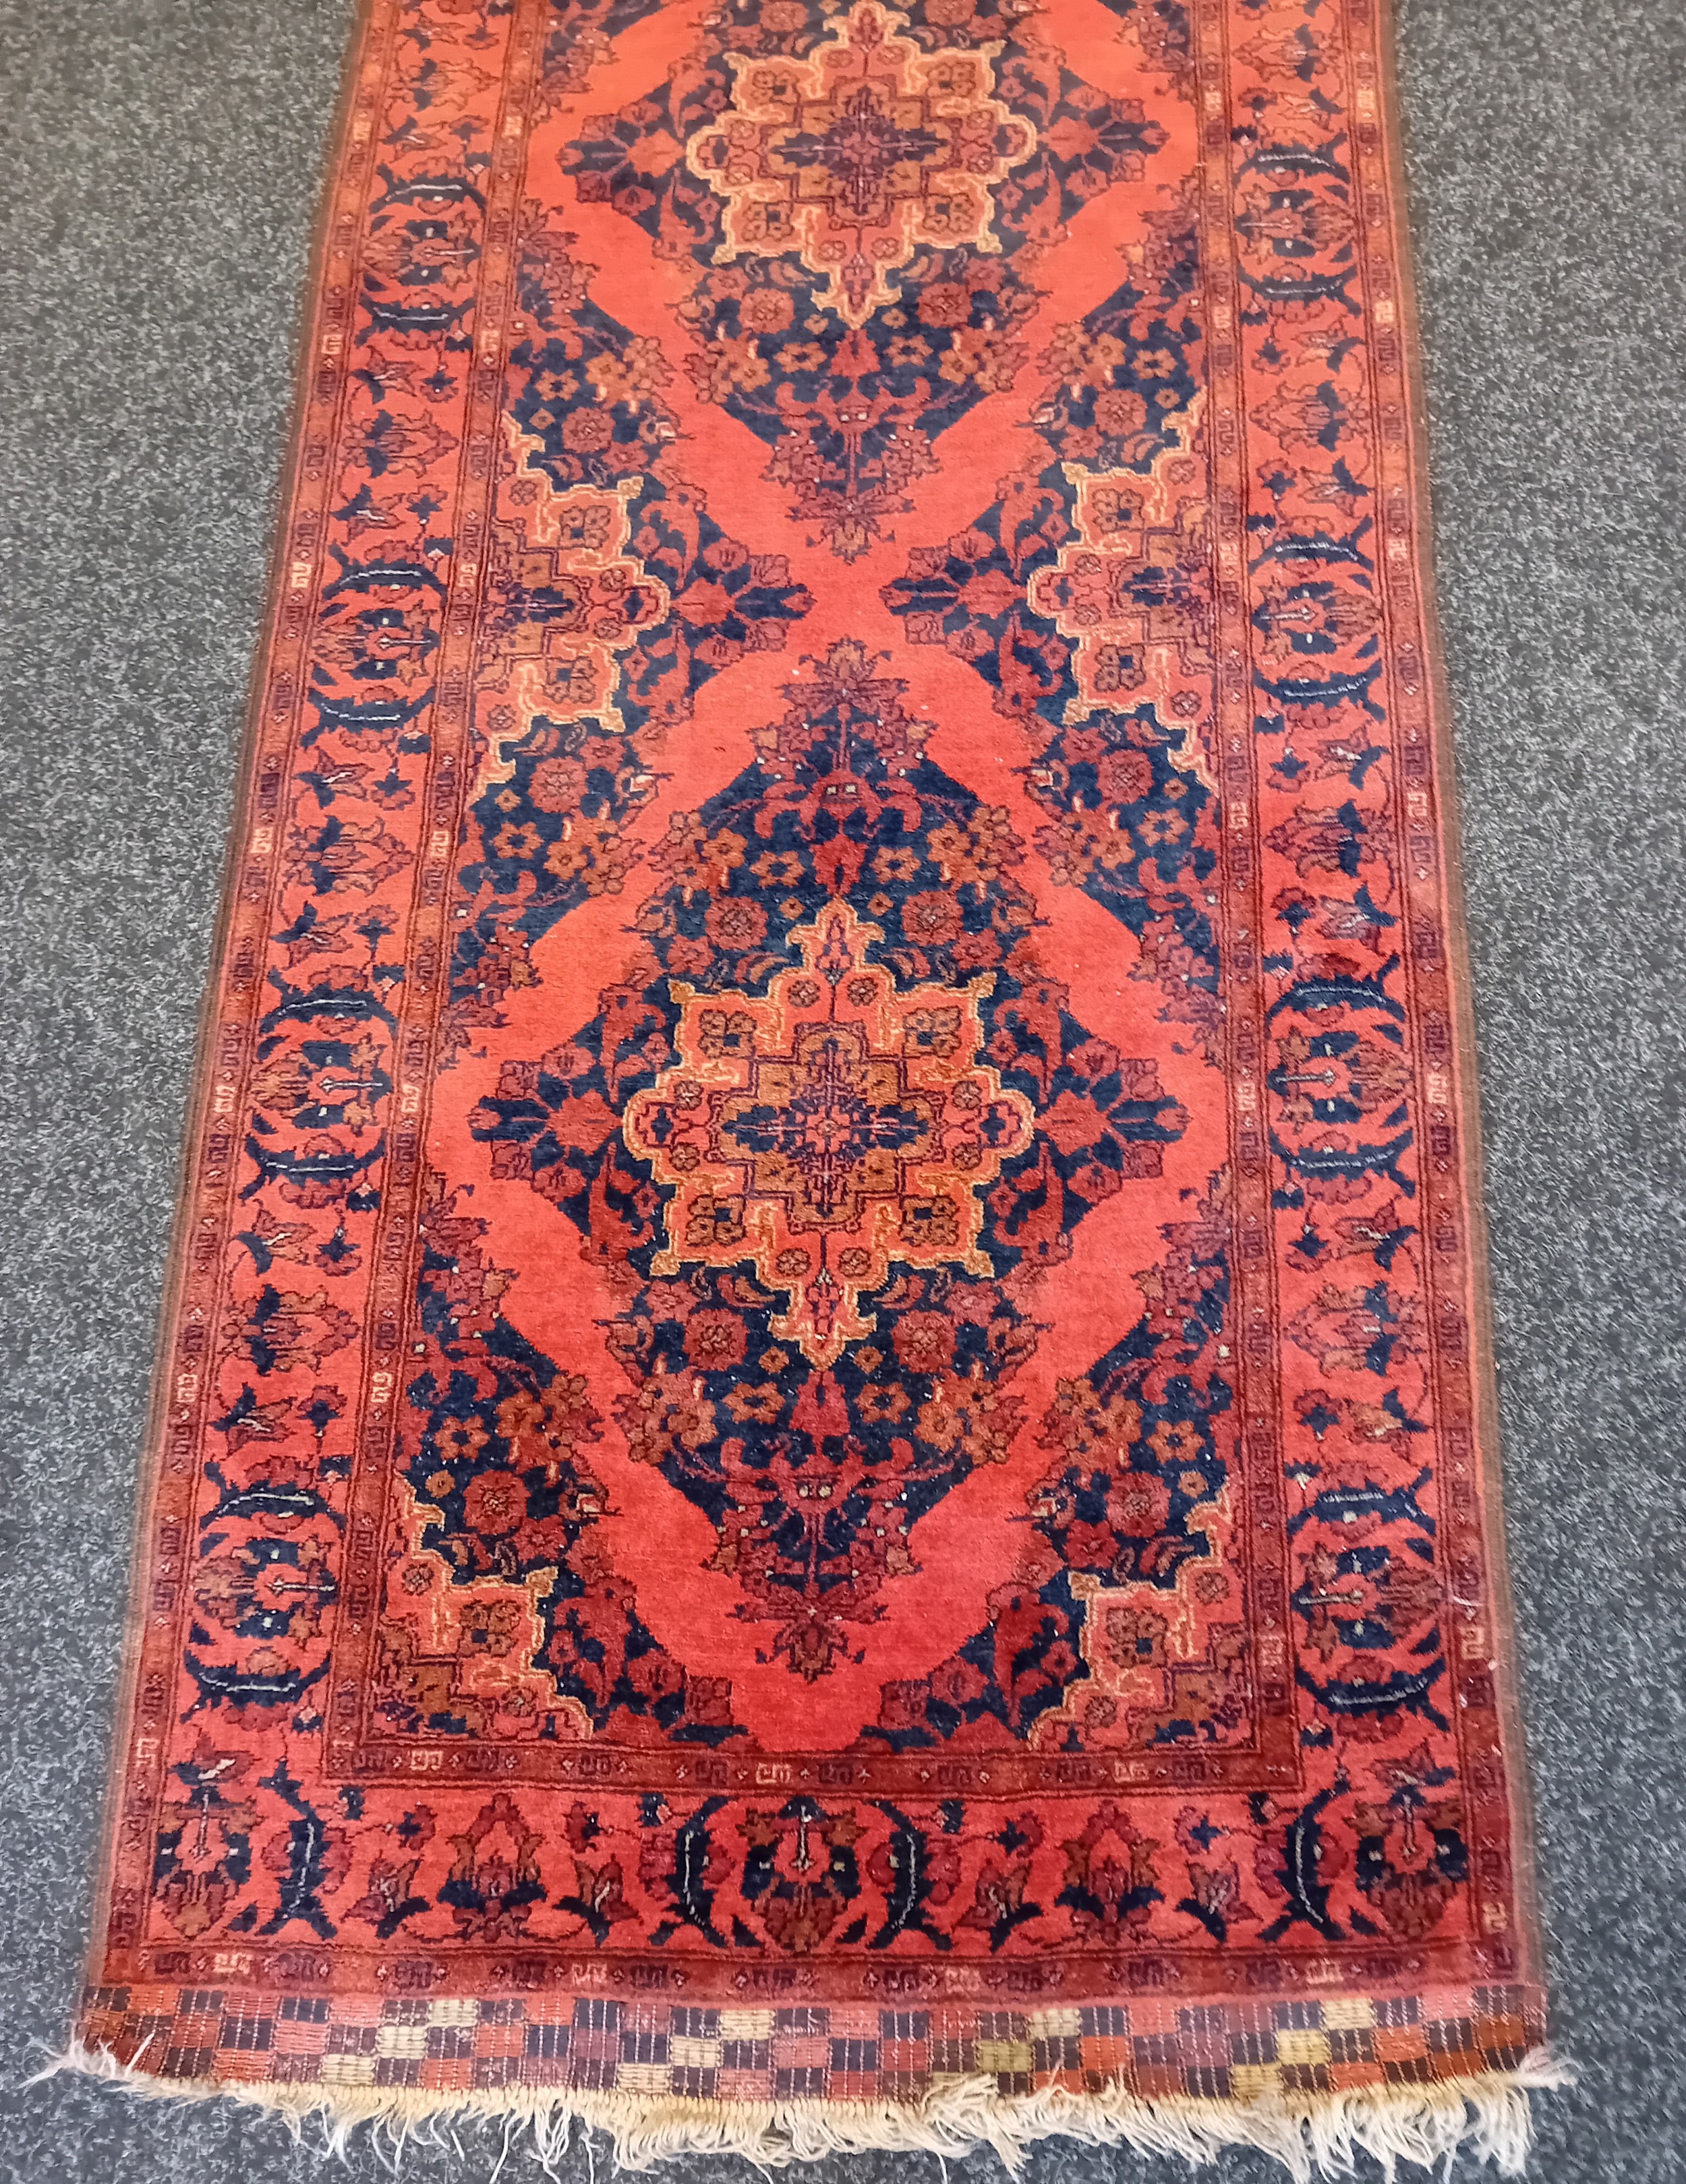 Antique red and blue hall runner [390x95cm] - Image 2 of 3